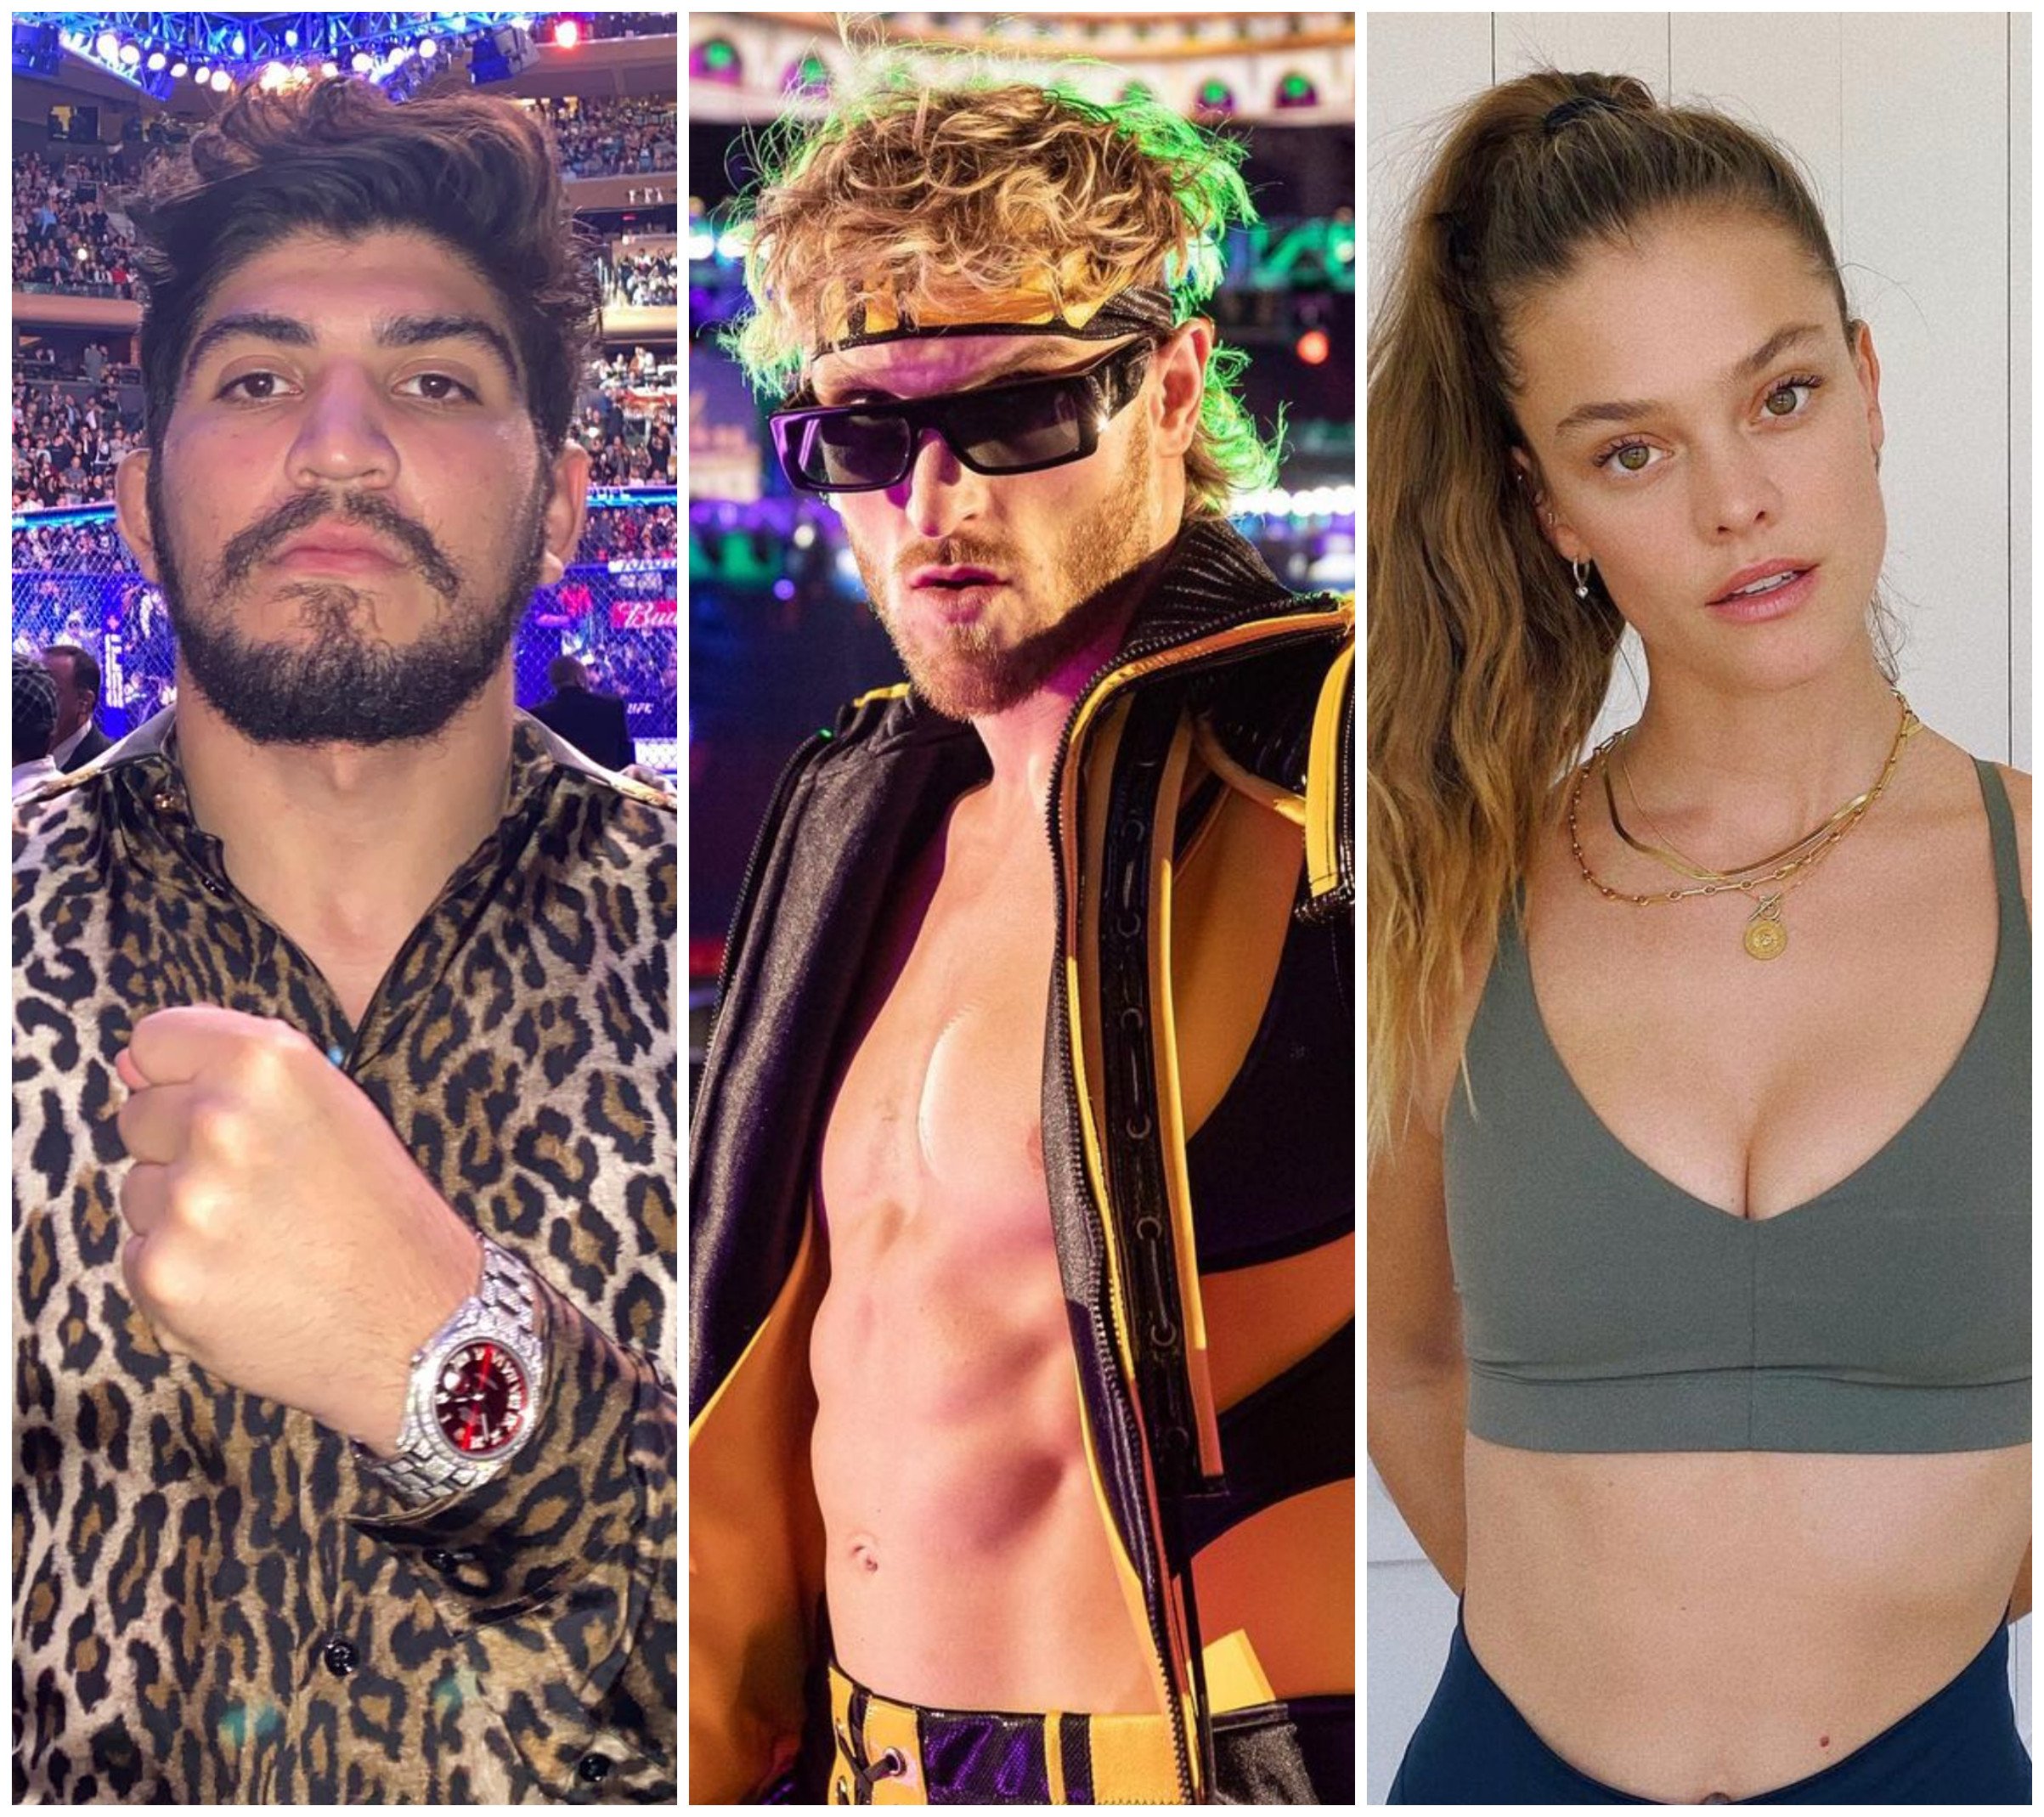 Dillon Danis and Logan Paul are getting ready to fight each other, but now Paul’s fiancée Nina Agdal has been dragged into the drama. Photos: @dillondanis, @loganpaul, @ninaagdal/Instagram